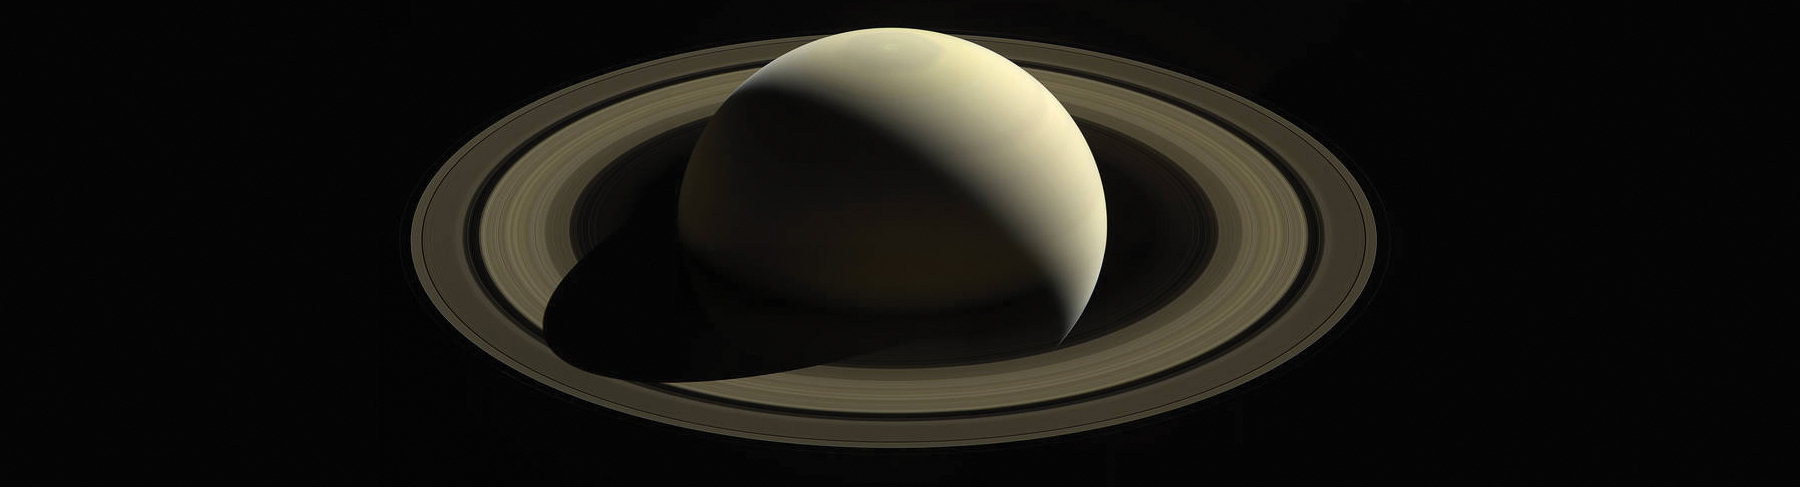 Distant view of Saturn and its rings